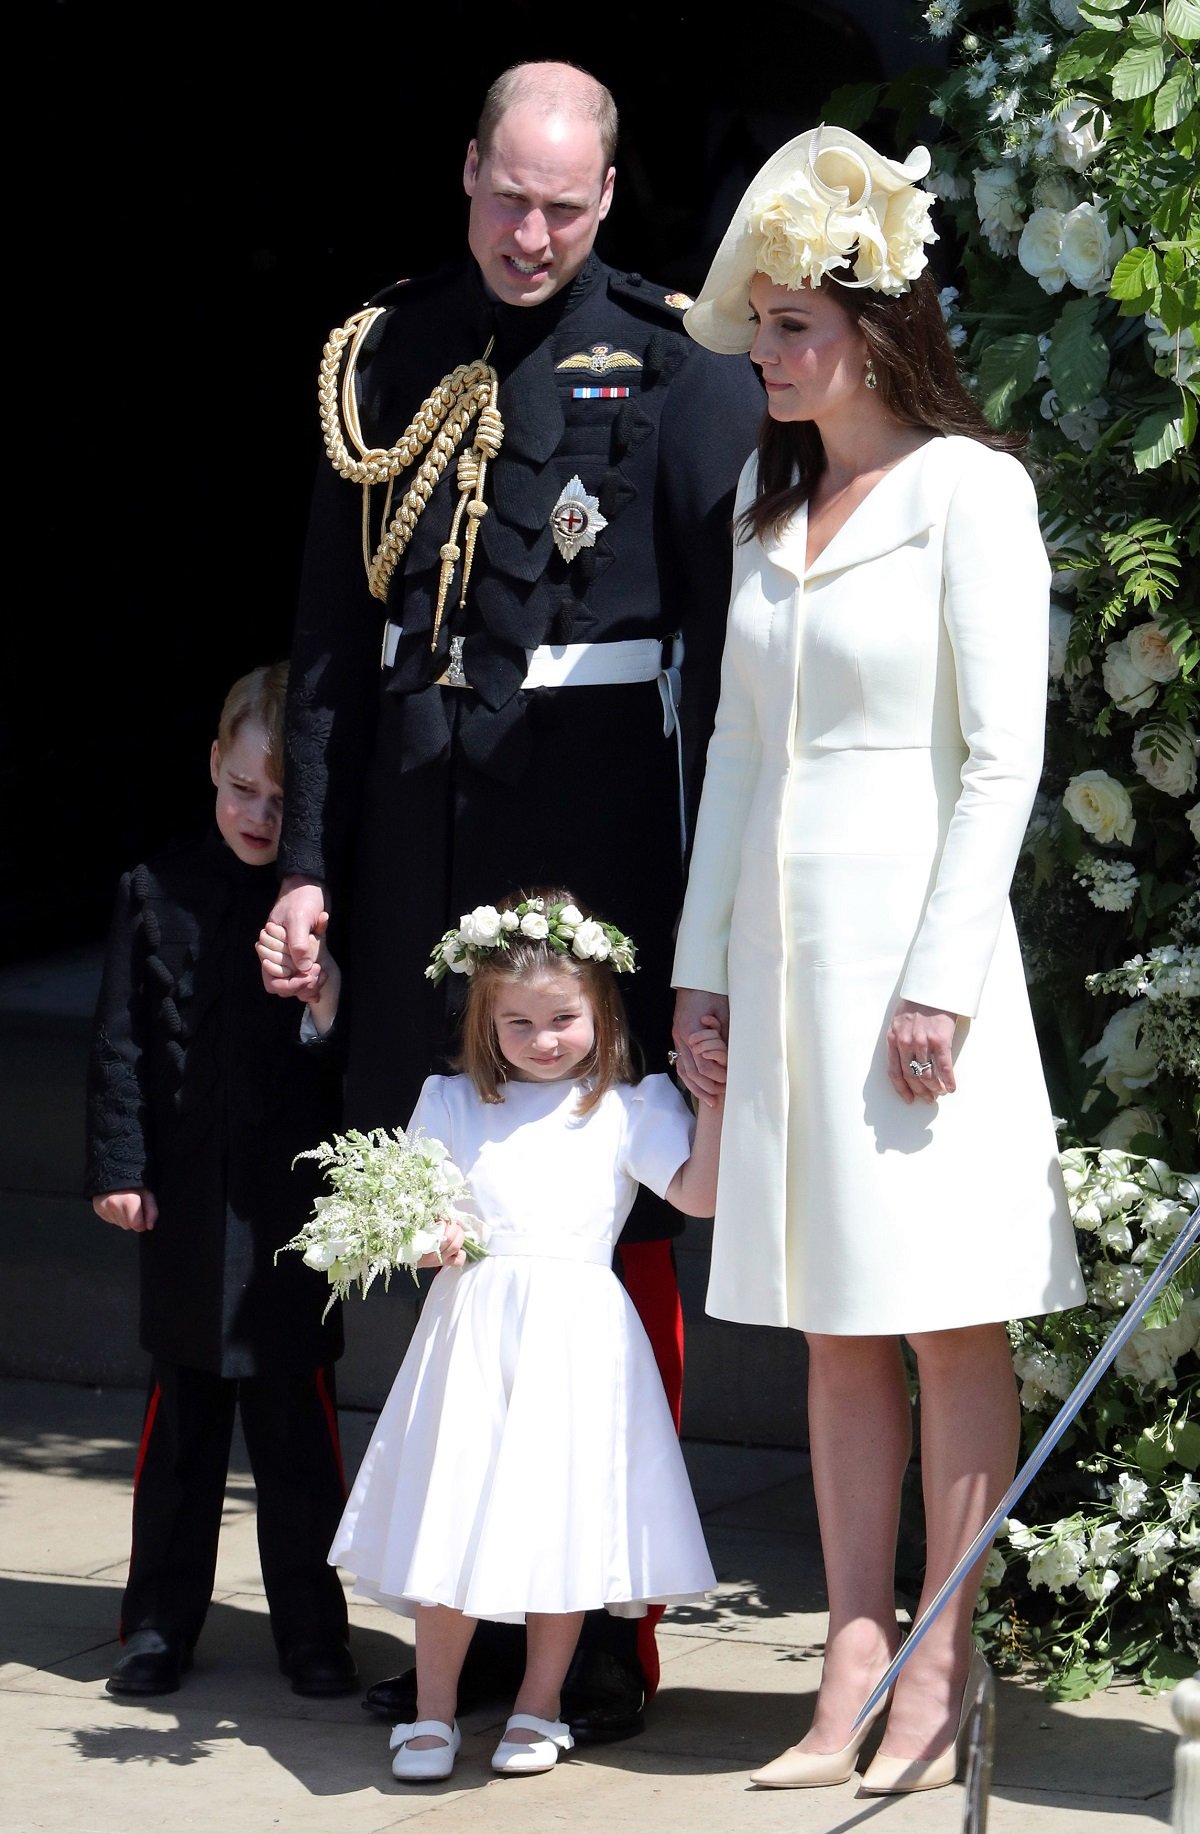 Prince William, Kate Middleton, and their children following the wedding of Prince Harry and Meghan Markle